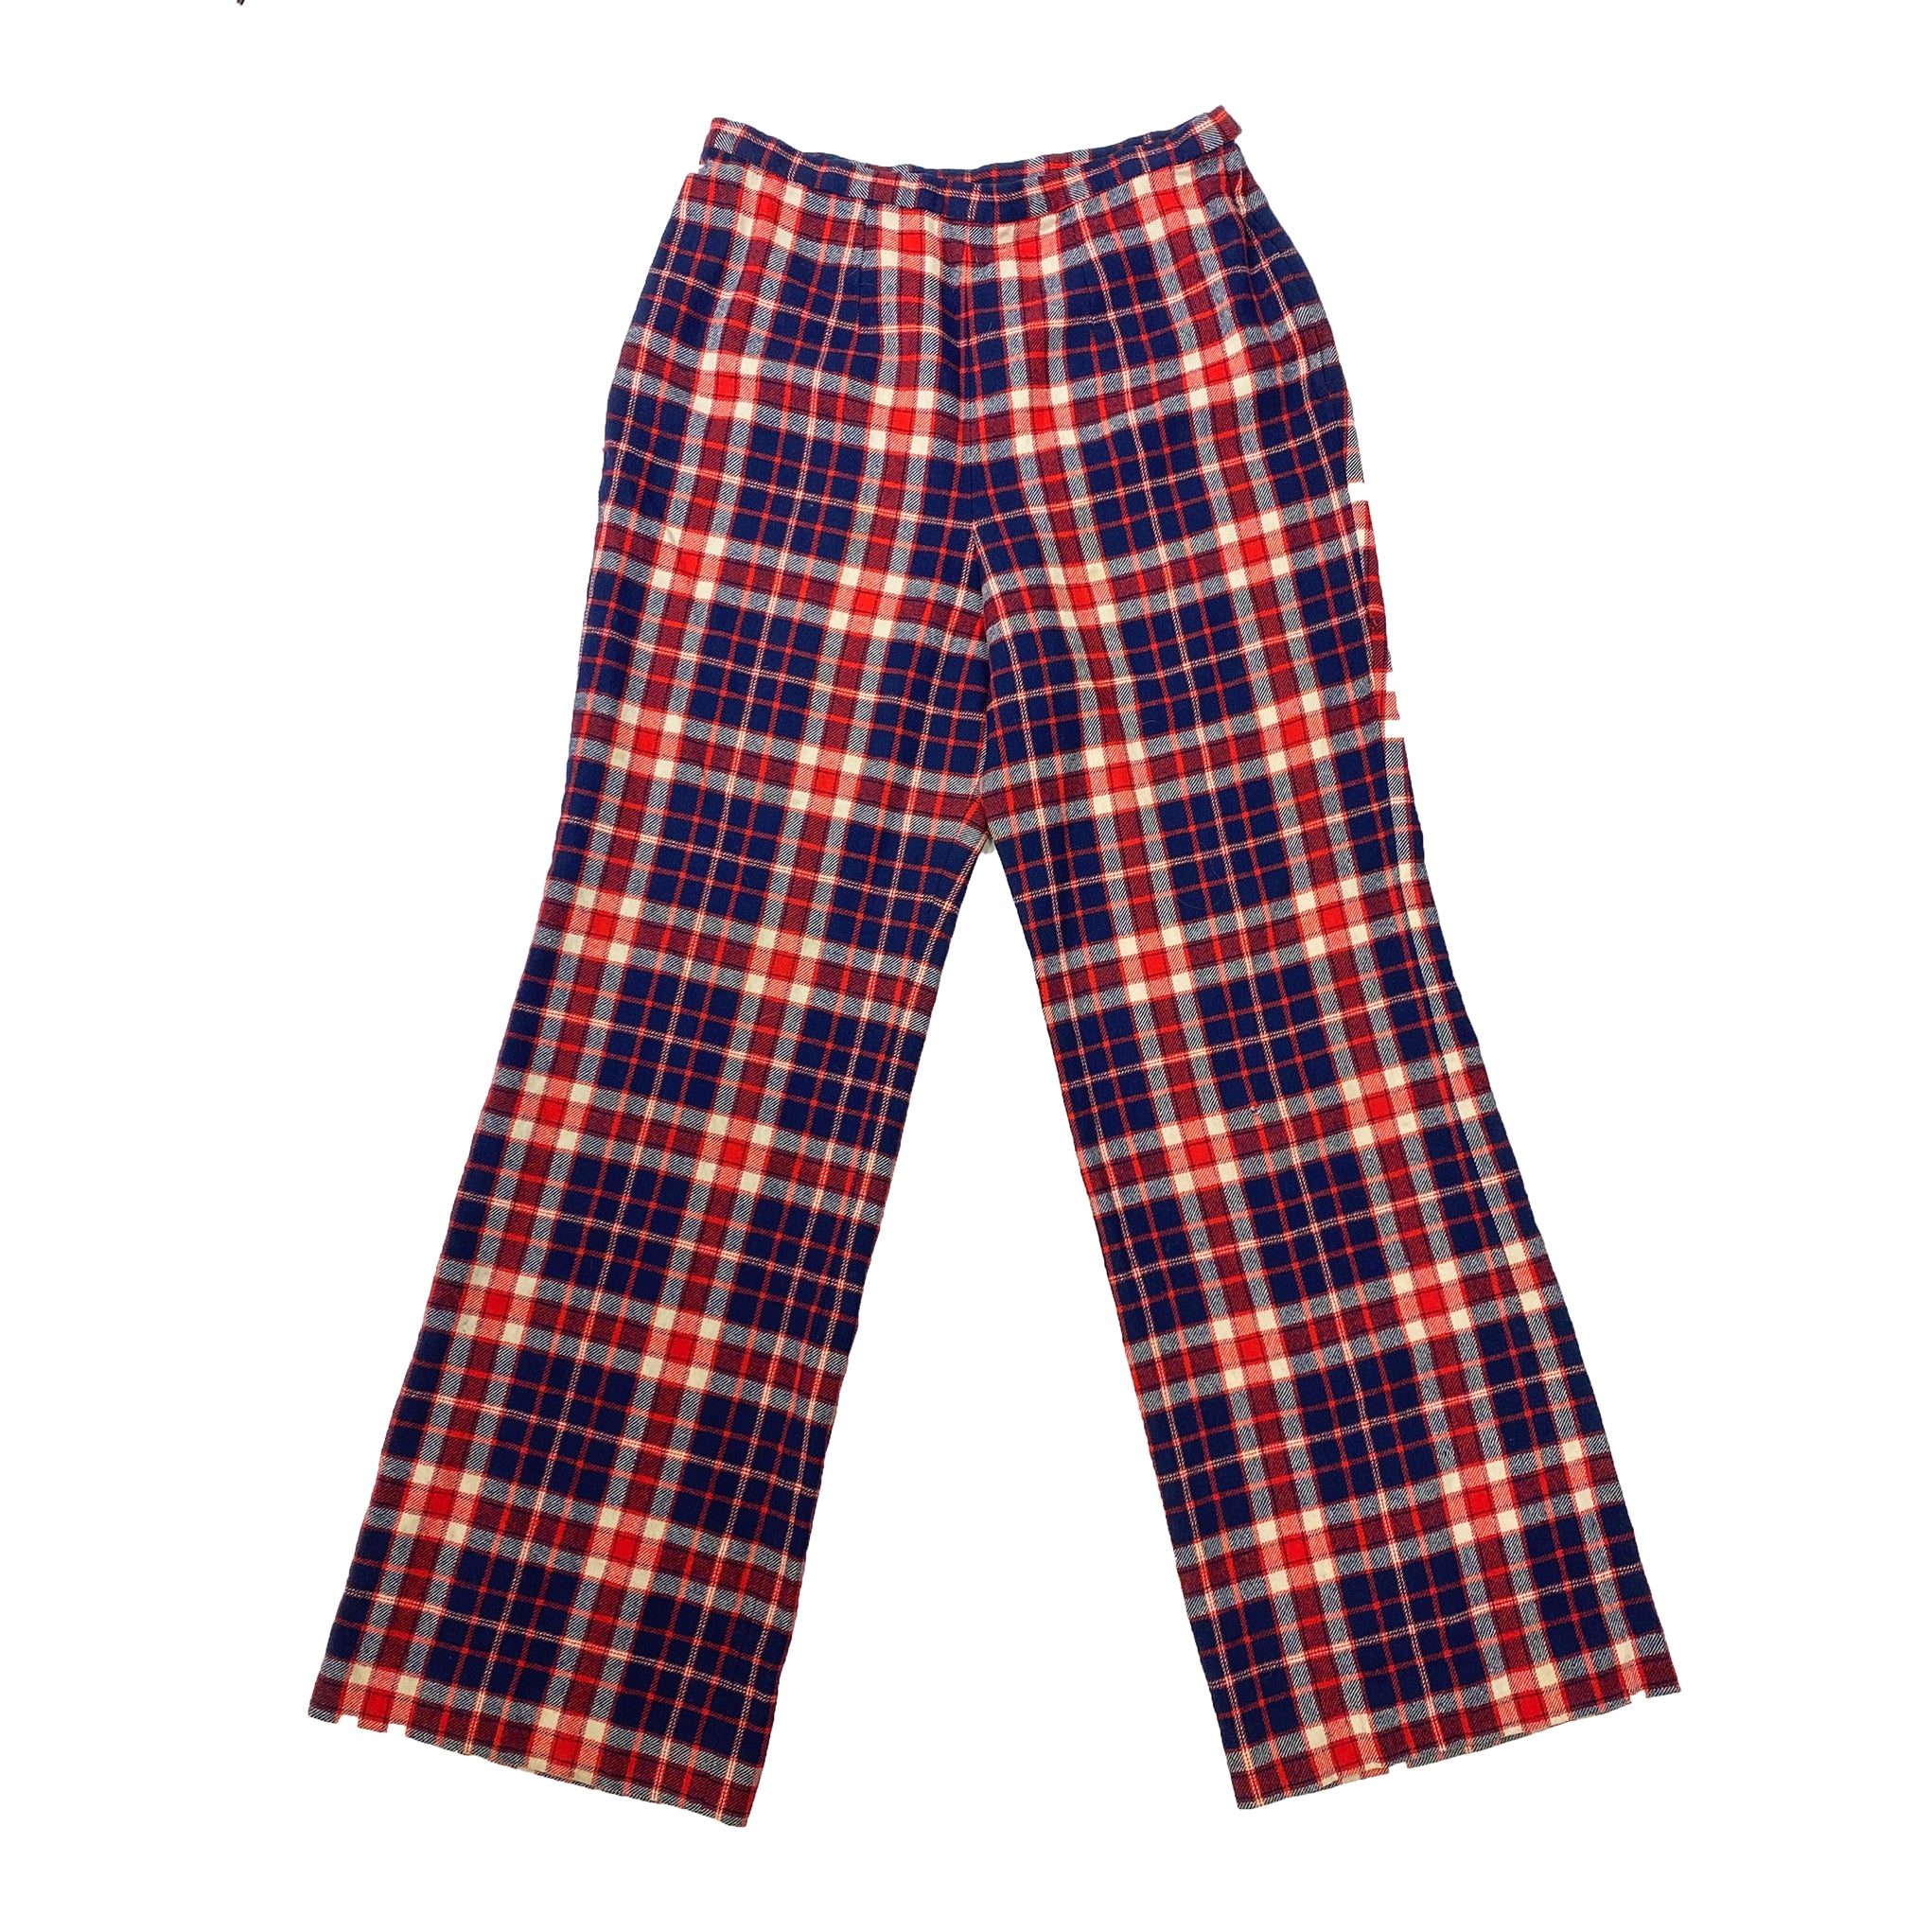 Pendelton Knockabouts Red Plaid Wool Trousers